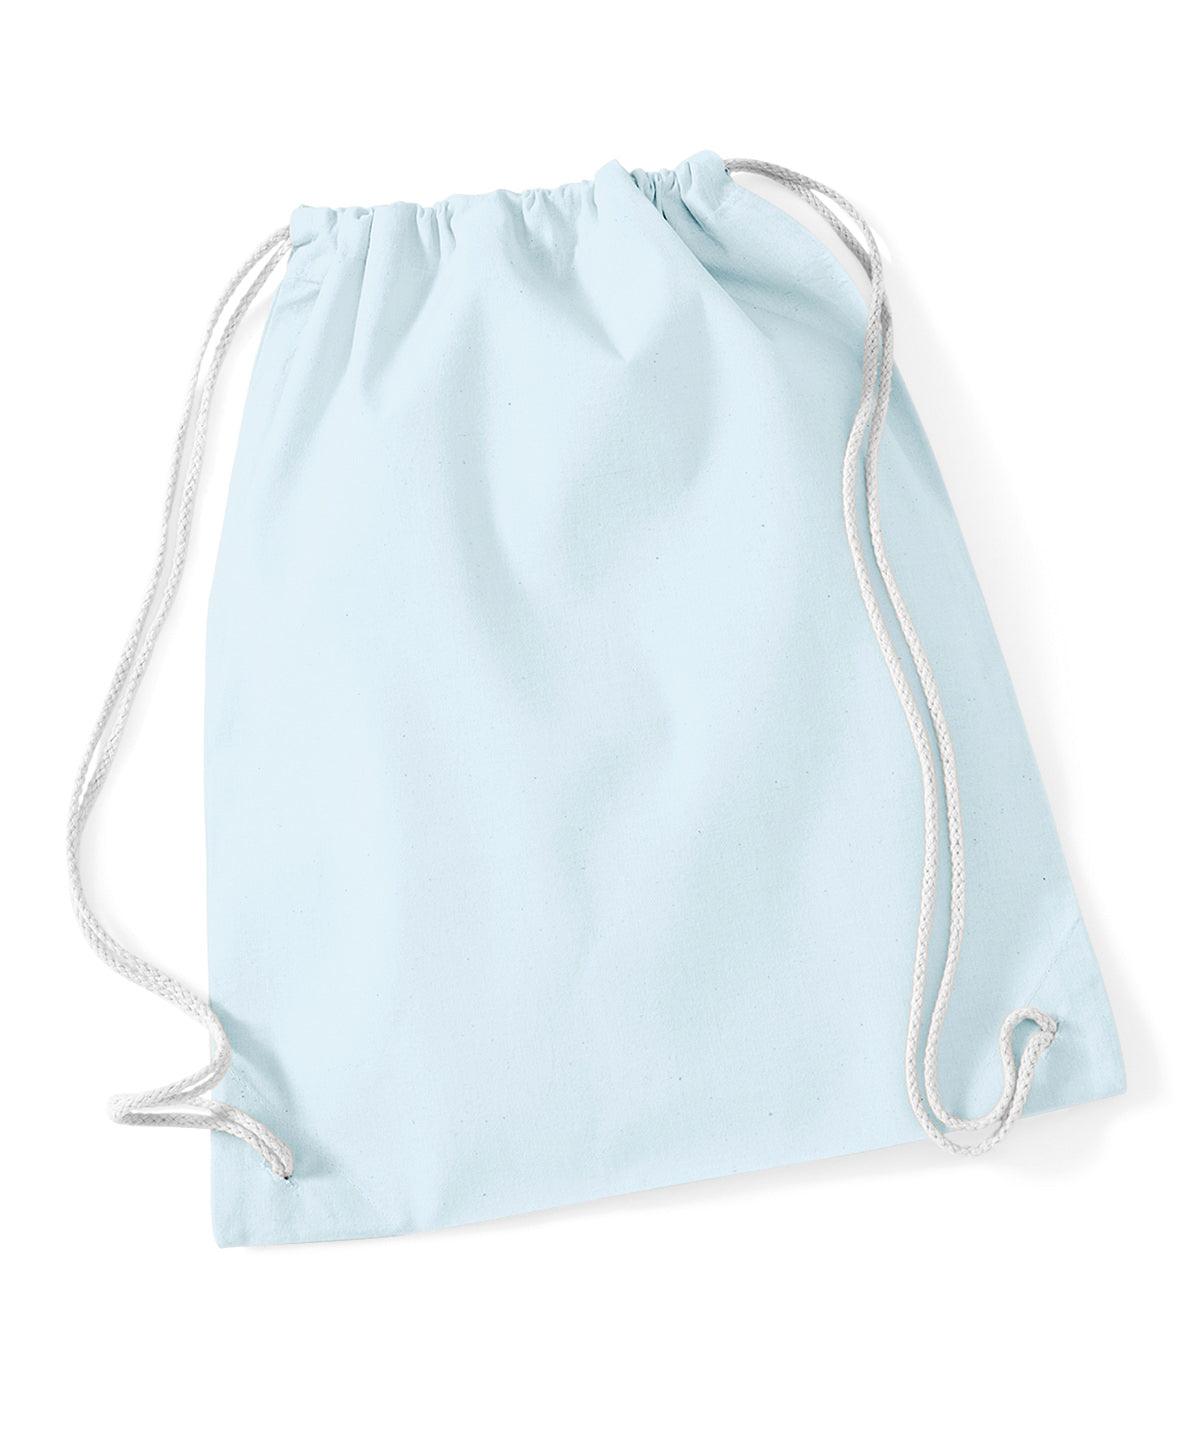 Pastel Blue/White - Cotton gymsac Bags Westford Mill Bags & Luggage, Junior, Must Haves, Pastels and Tie Dye Schoolwear Centres